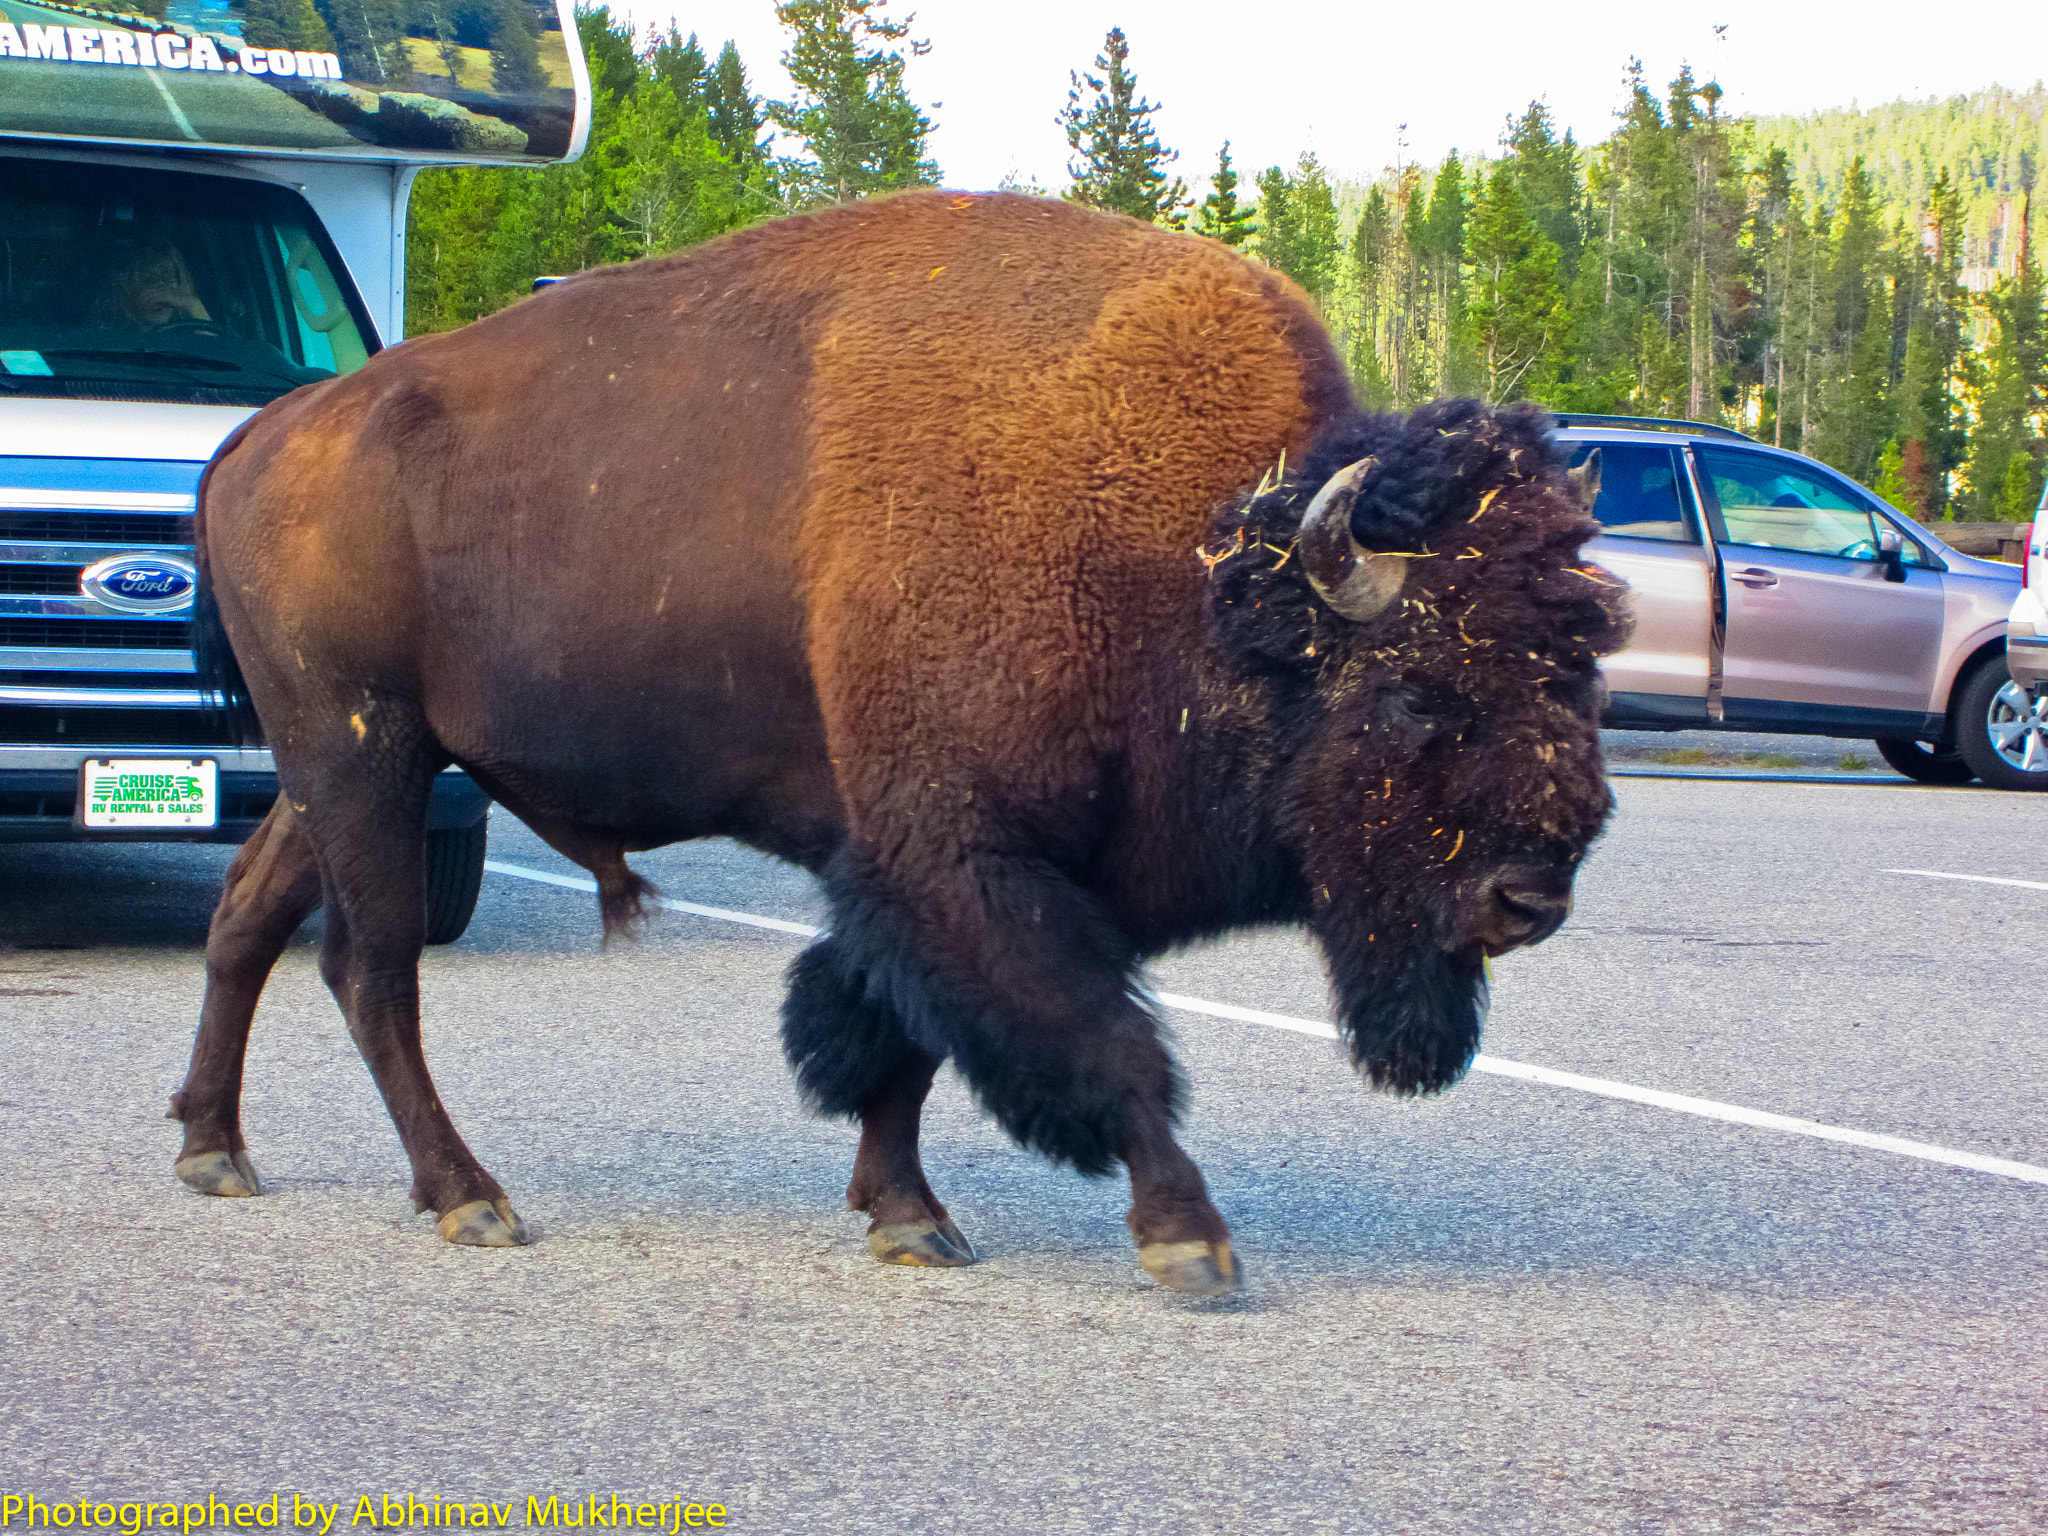 Canon PowerShot ELPH 300 HS (IXUS 220 HS / IXY 410F) sample photo. Brave bison going near humans photography